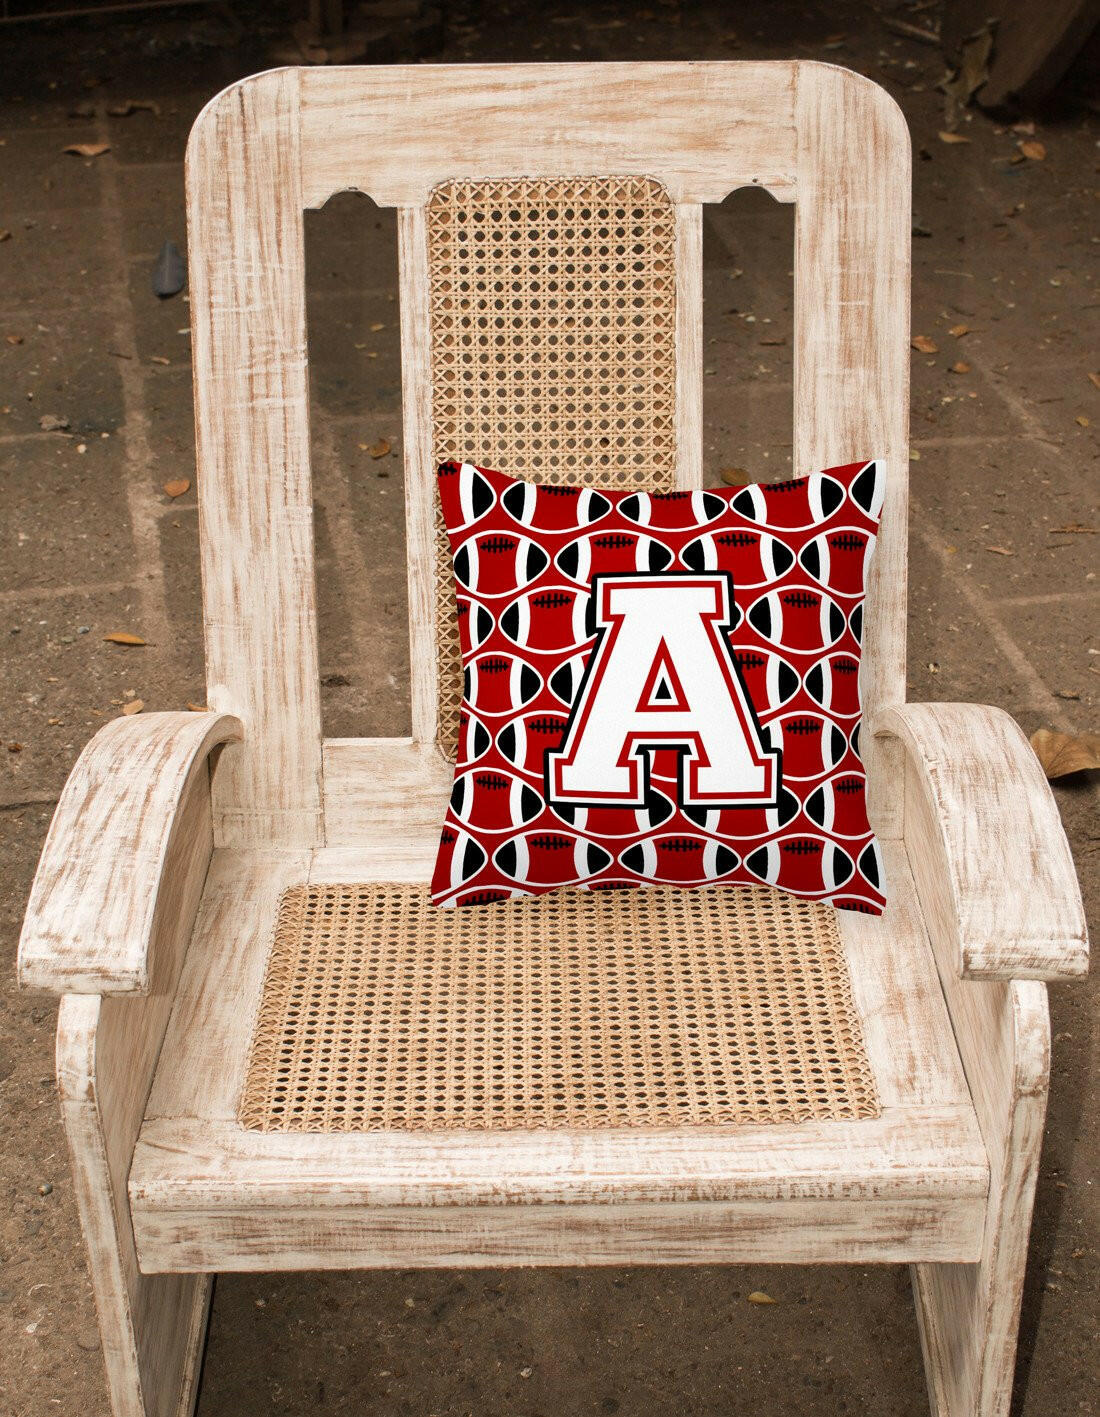 Letter A Football Cardinal and White Fabric Decorative Pillow CJ1082-APW1414 by Caroline's Treasures